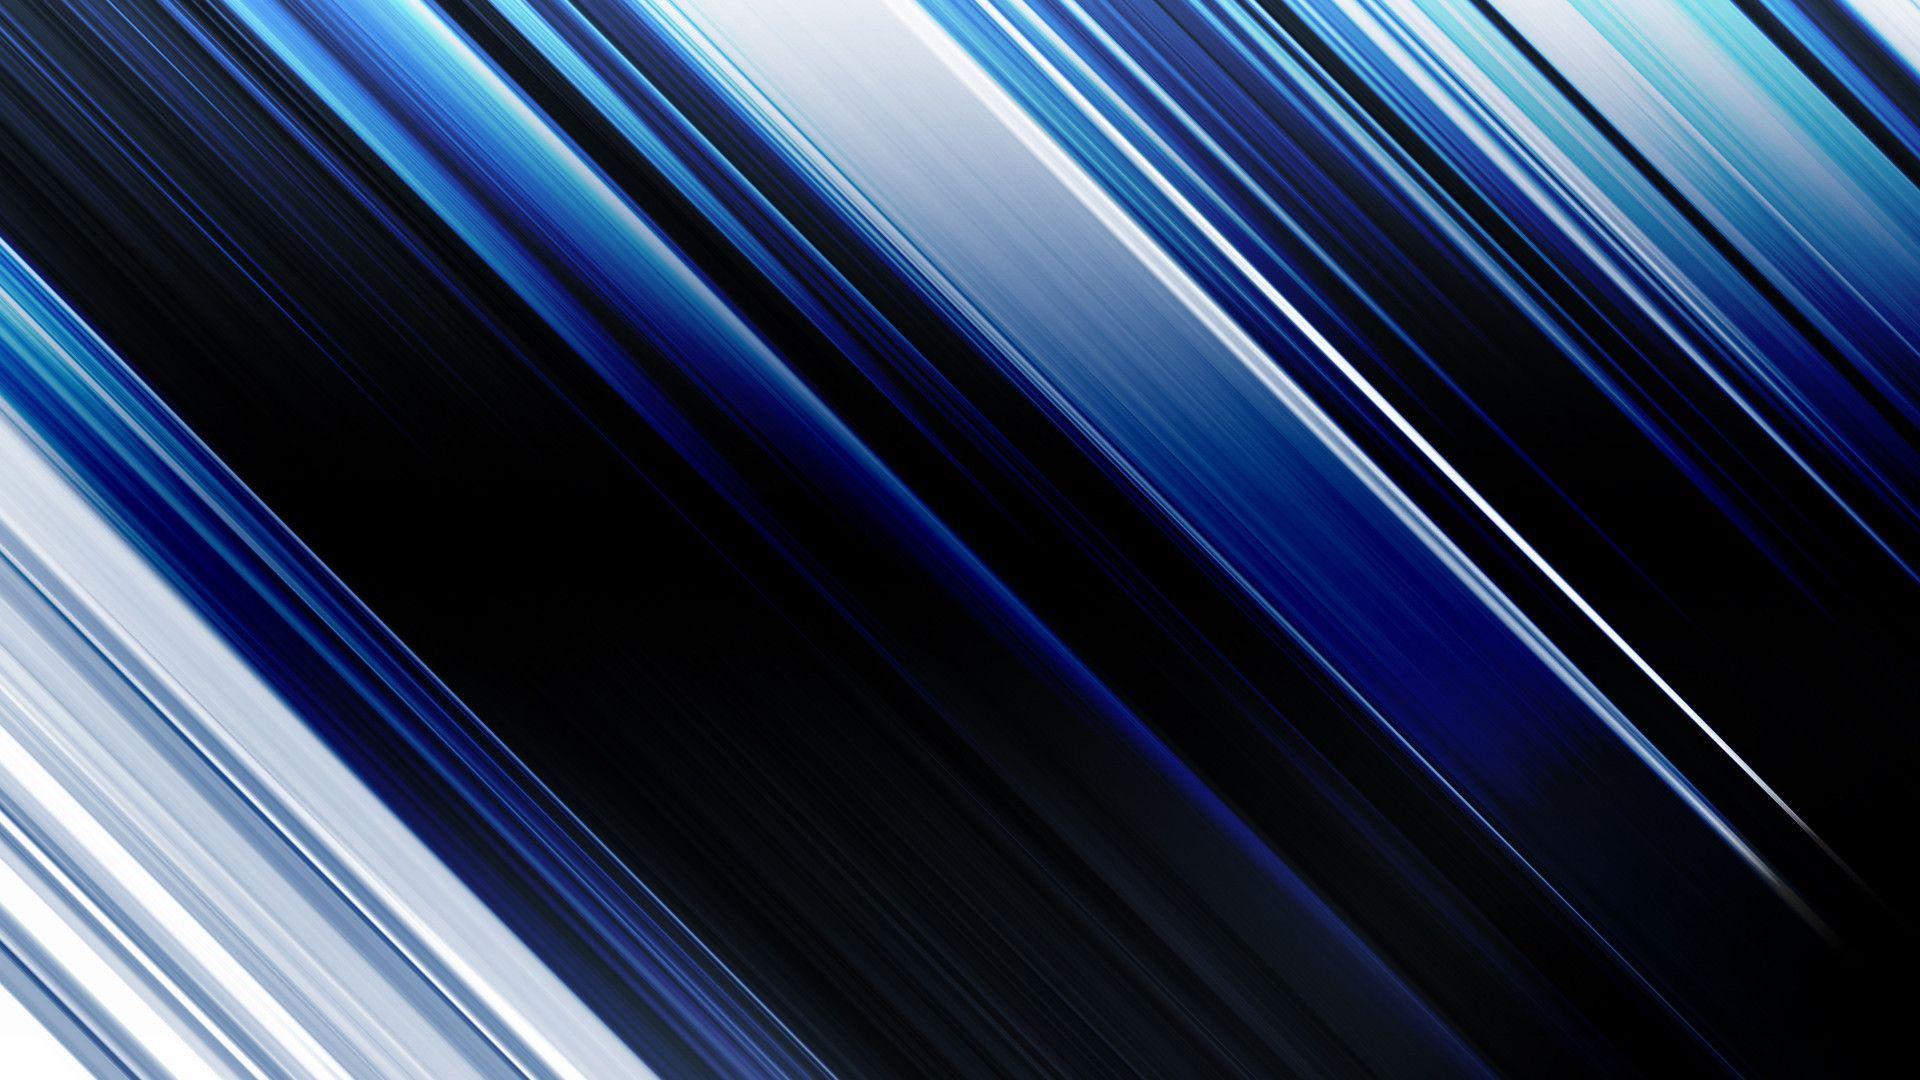 Download Abstract Blue Motion Blur Line Wallpaper 1920x1080. Full